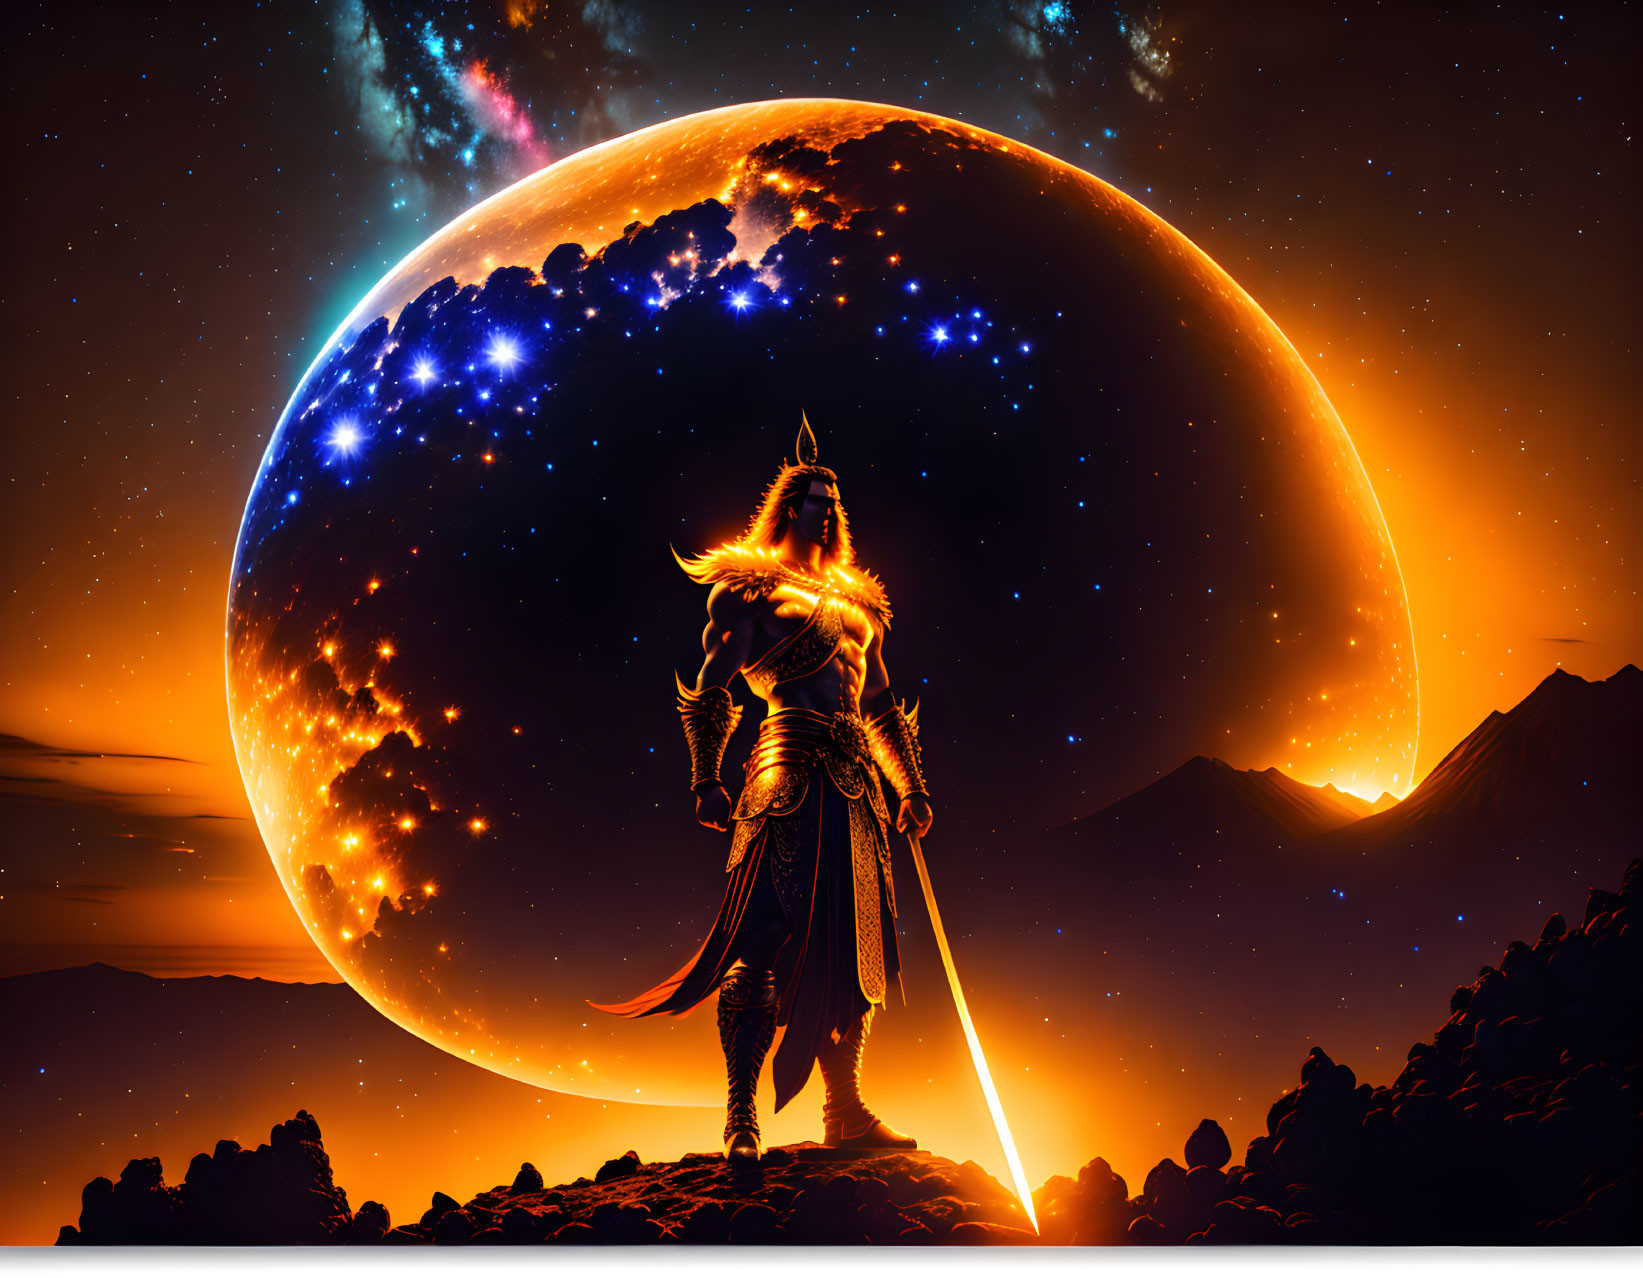 Armored warrior with glowing sword on rocky terrain under starry sky